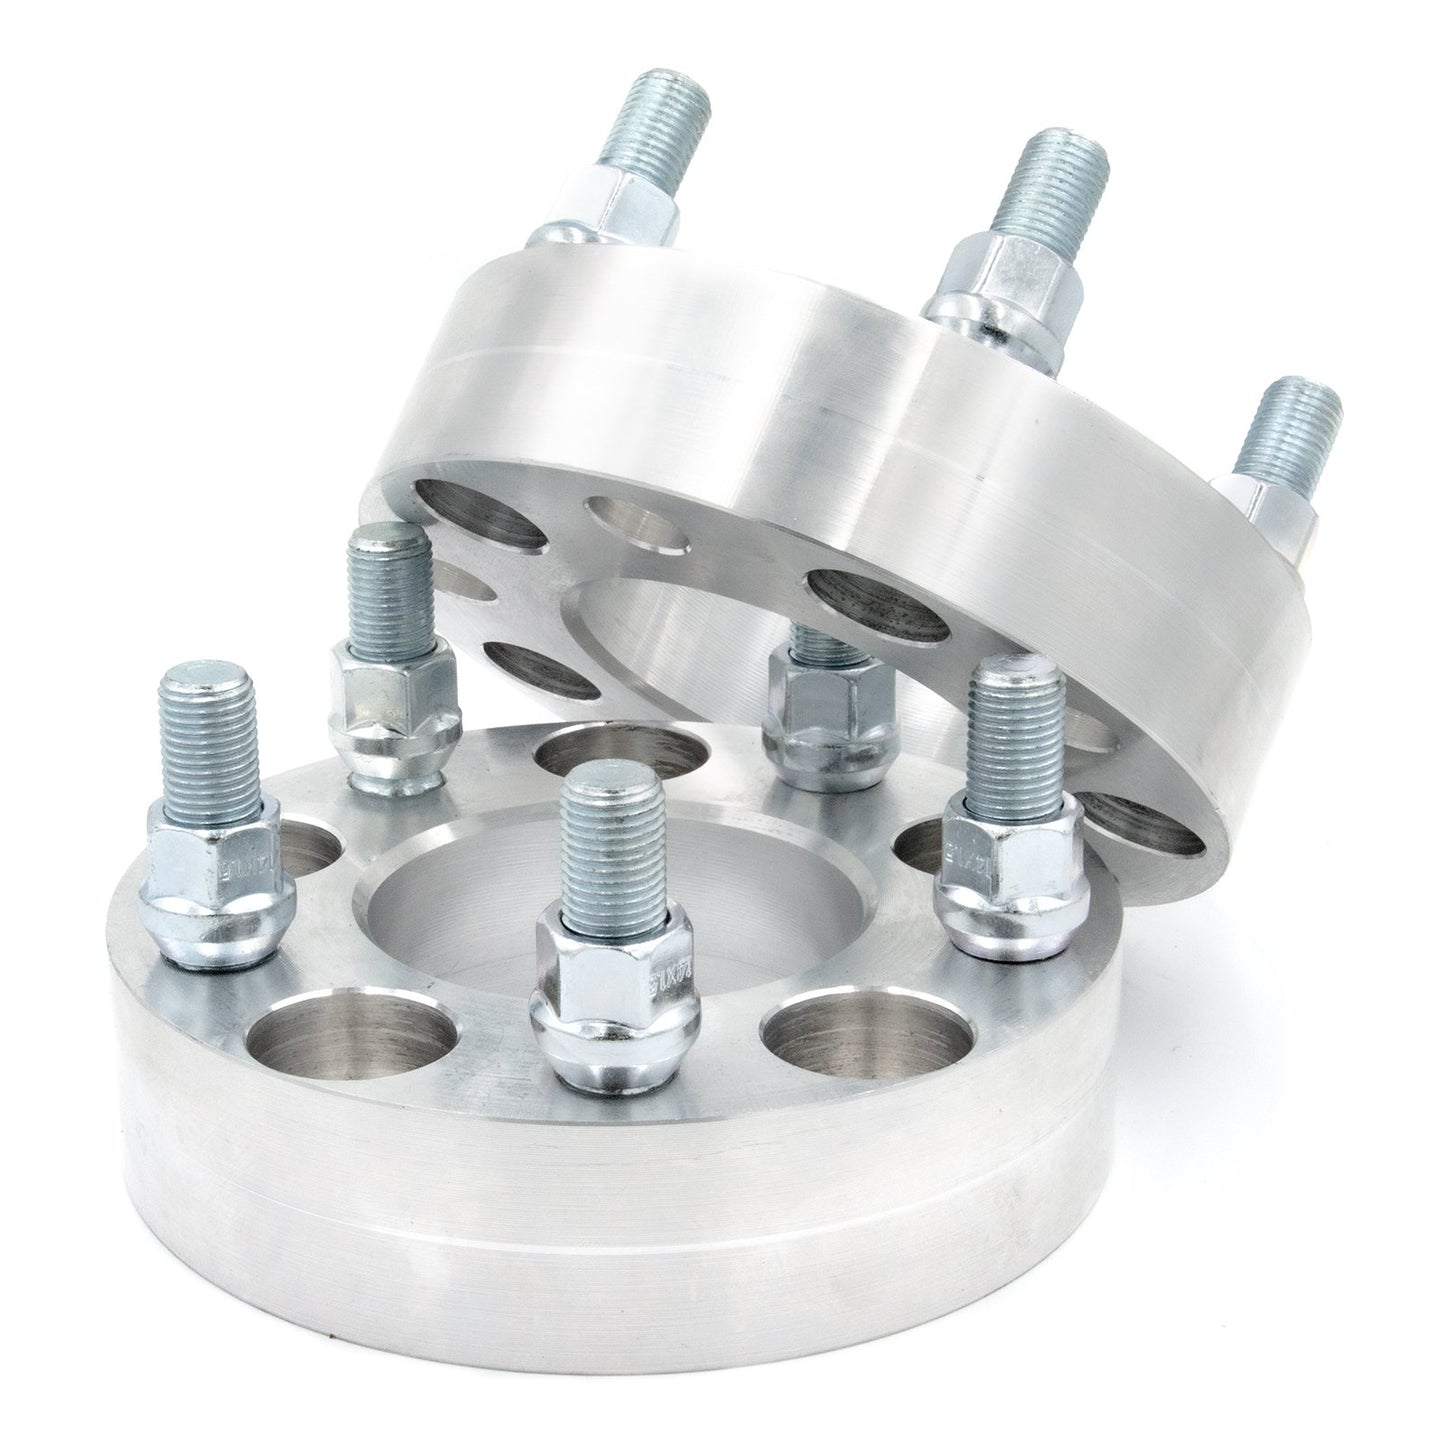 5x120 to 5x120 Wheel Spacer/Adapter - Thickness: 3/4"- 4"